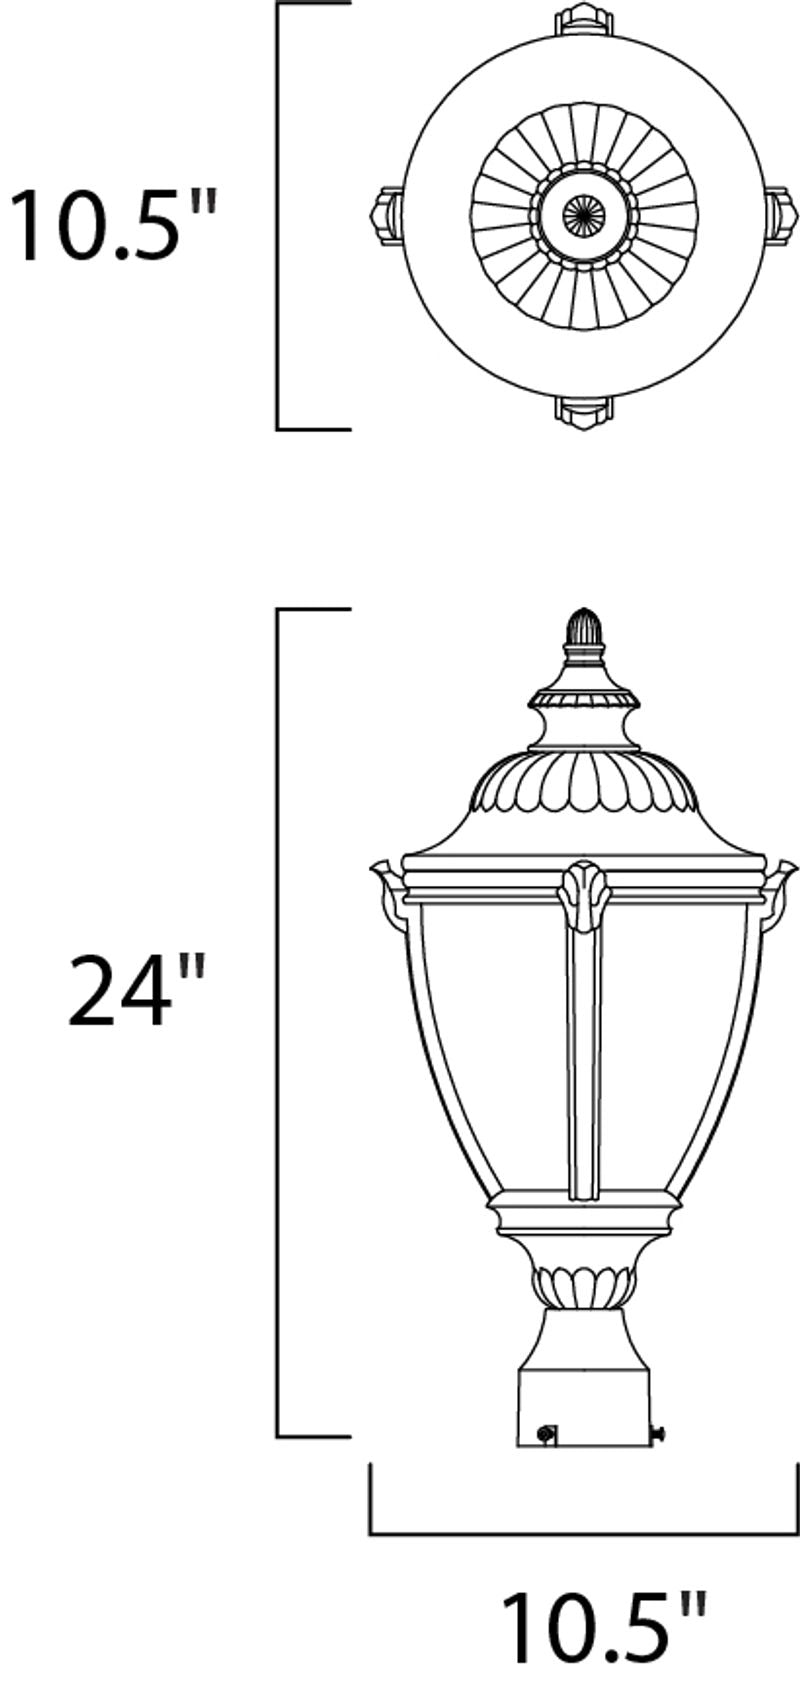 Morrow Bay DC 24' 3 light Outdoor Pole/Post Mount in Earth Tone